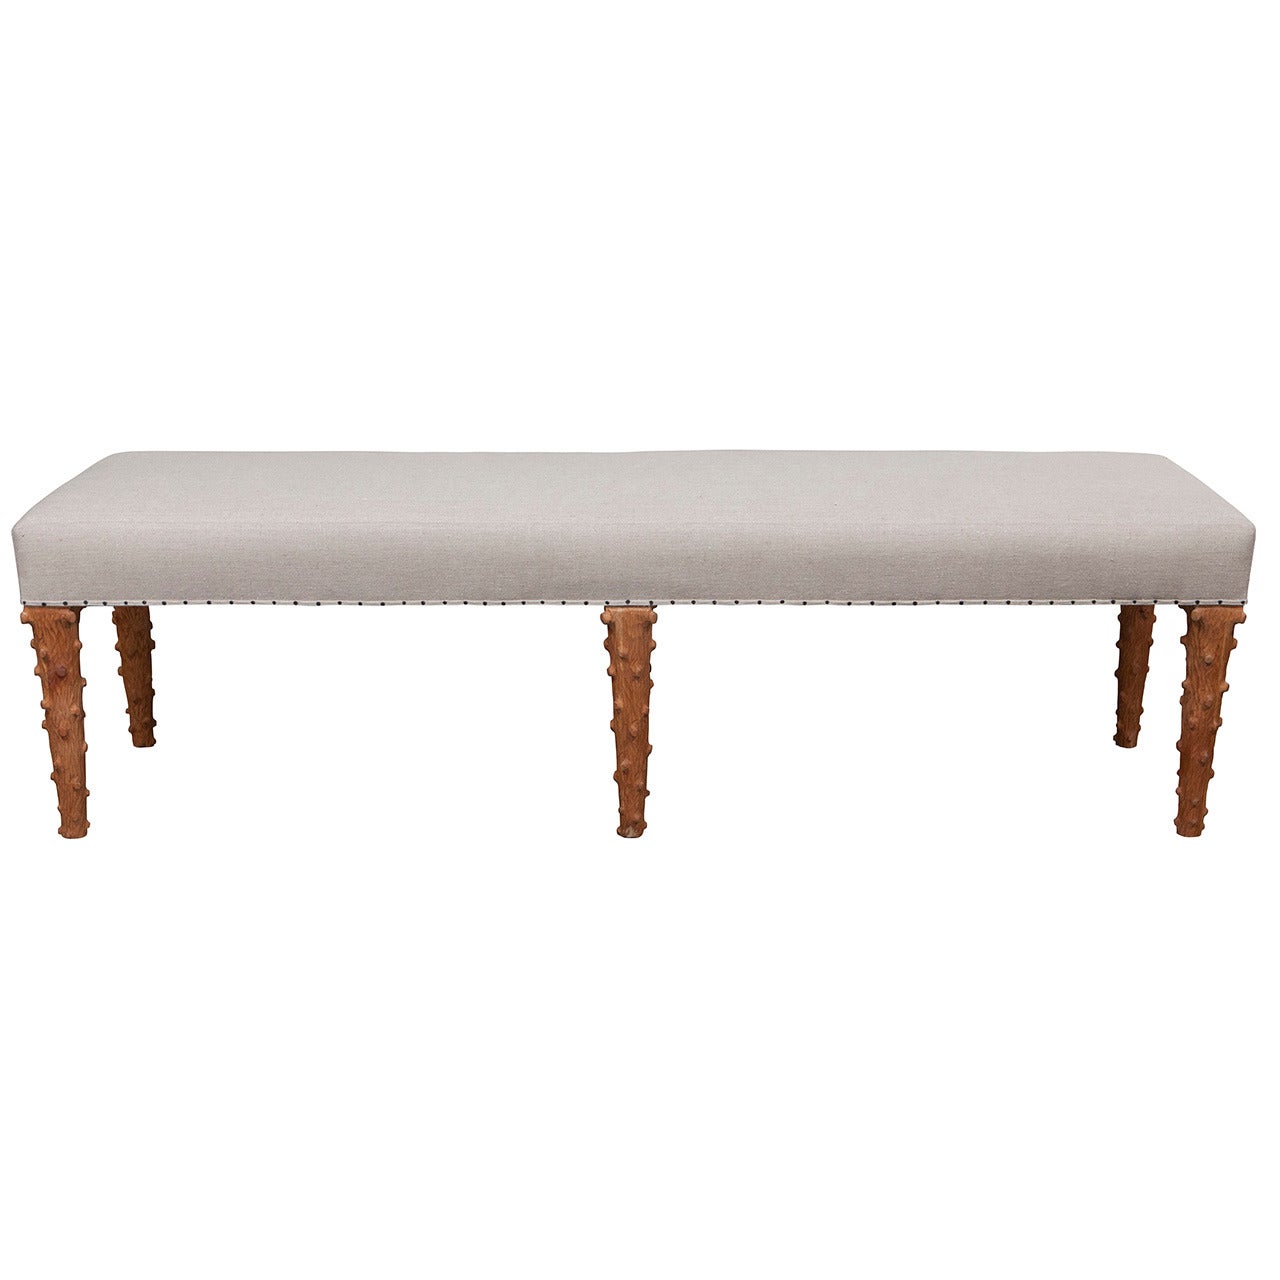 Limited Edition Jefferson West Private Label Bench with Carved Legs For Sale